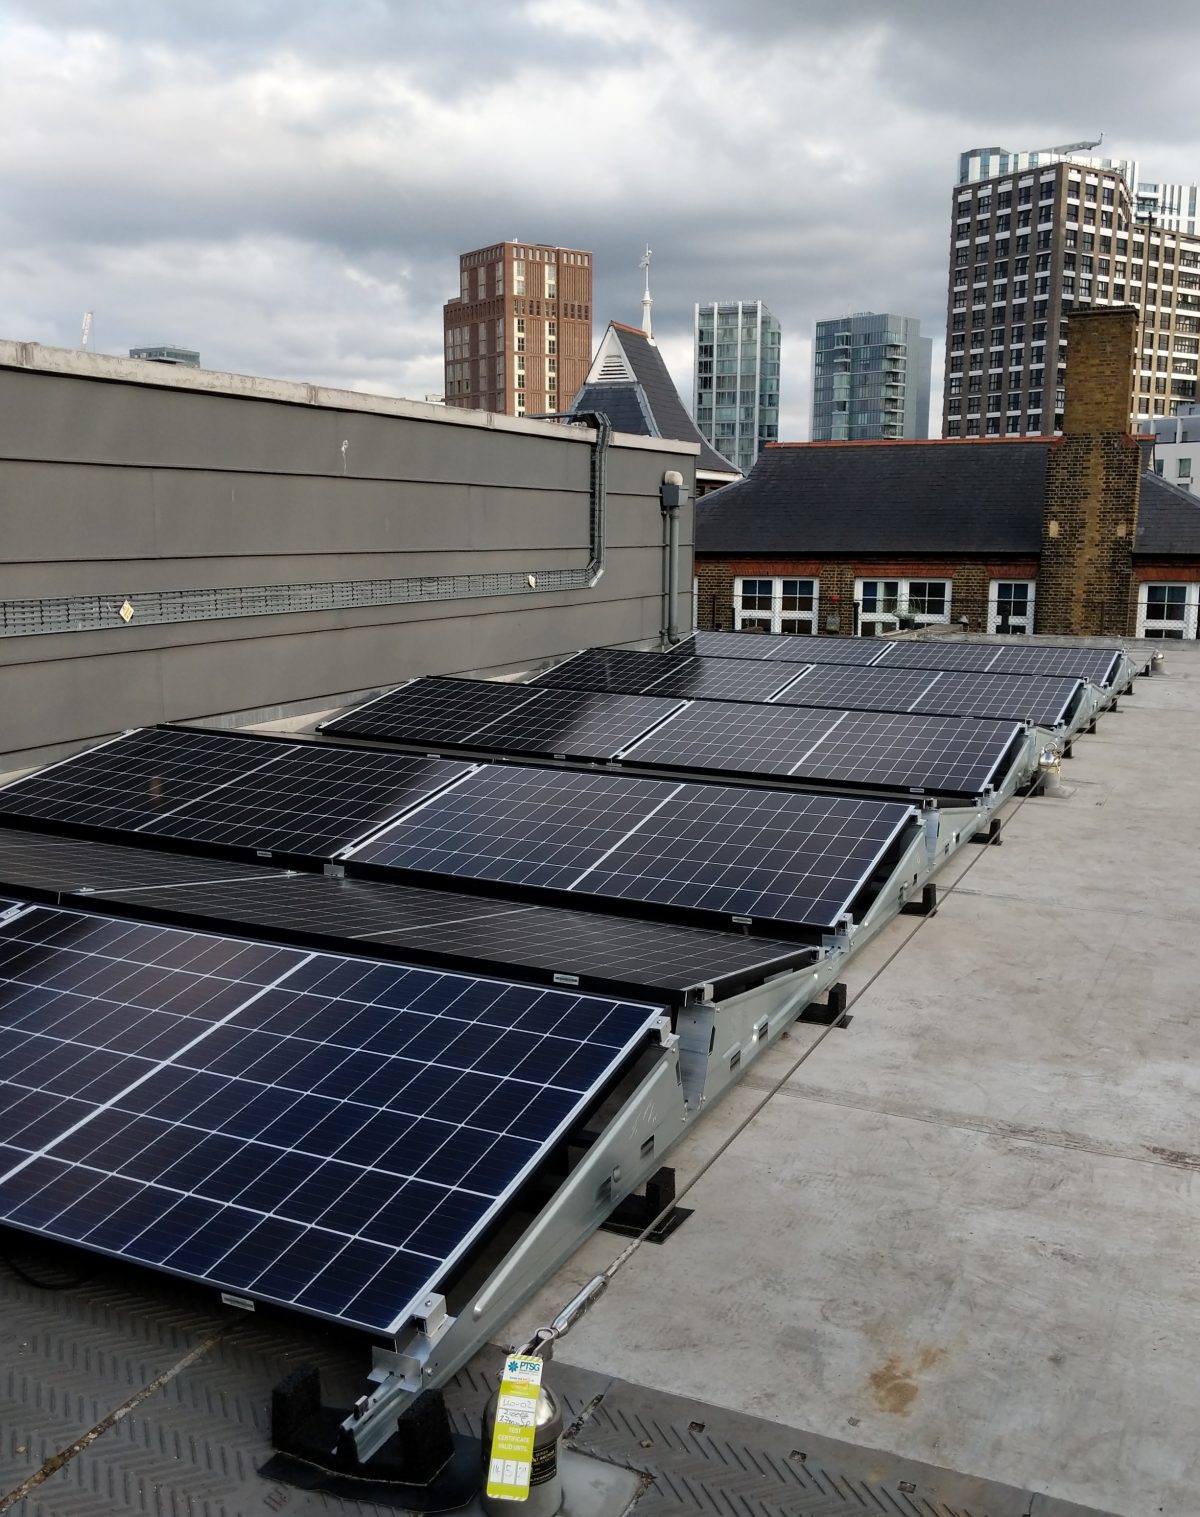 Roof of Toynbee Studios with solar panels on it